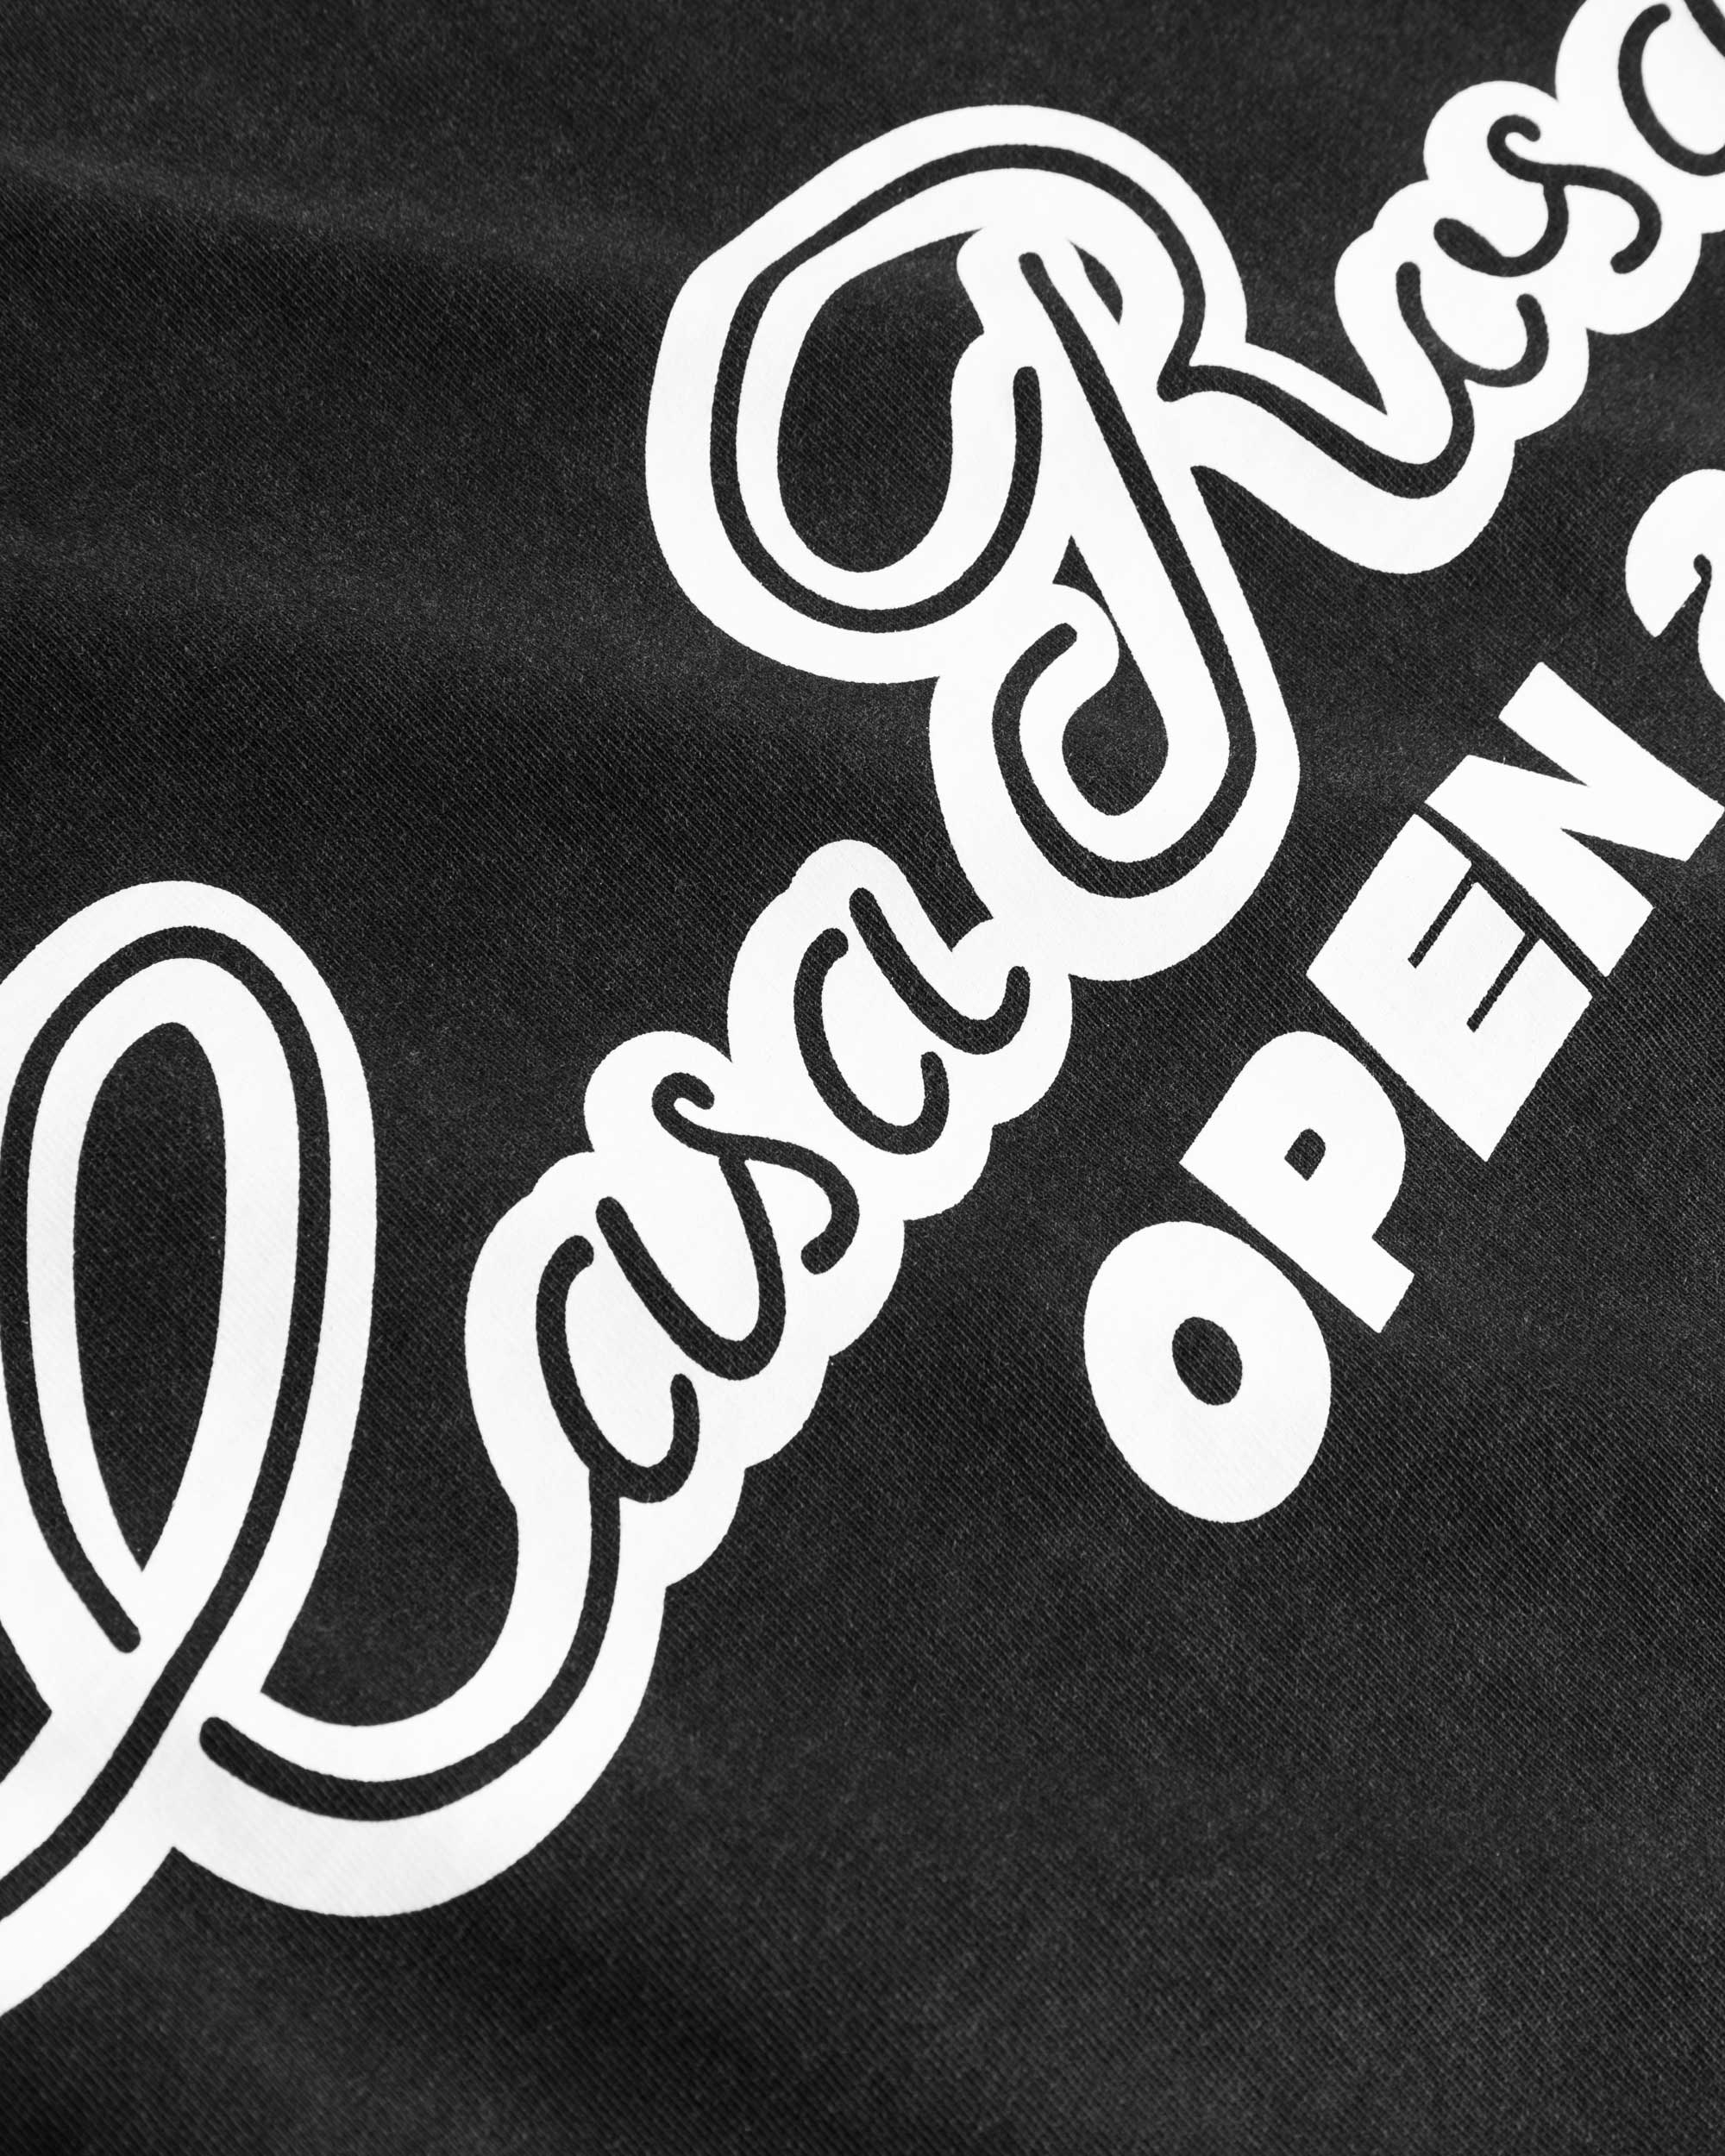 Close up view of white text print on black t-shirt.